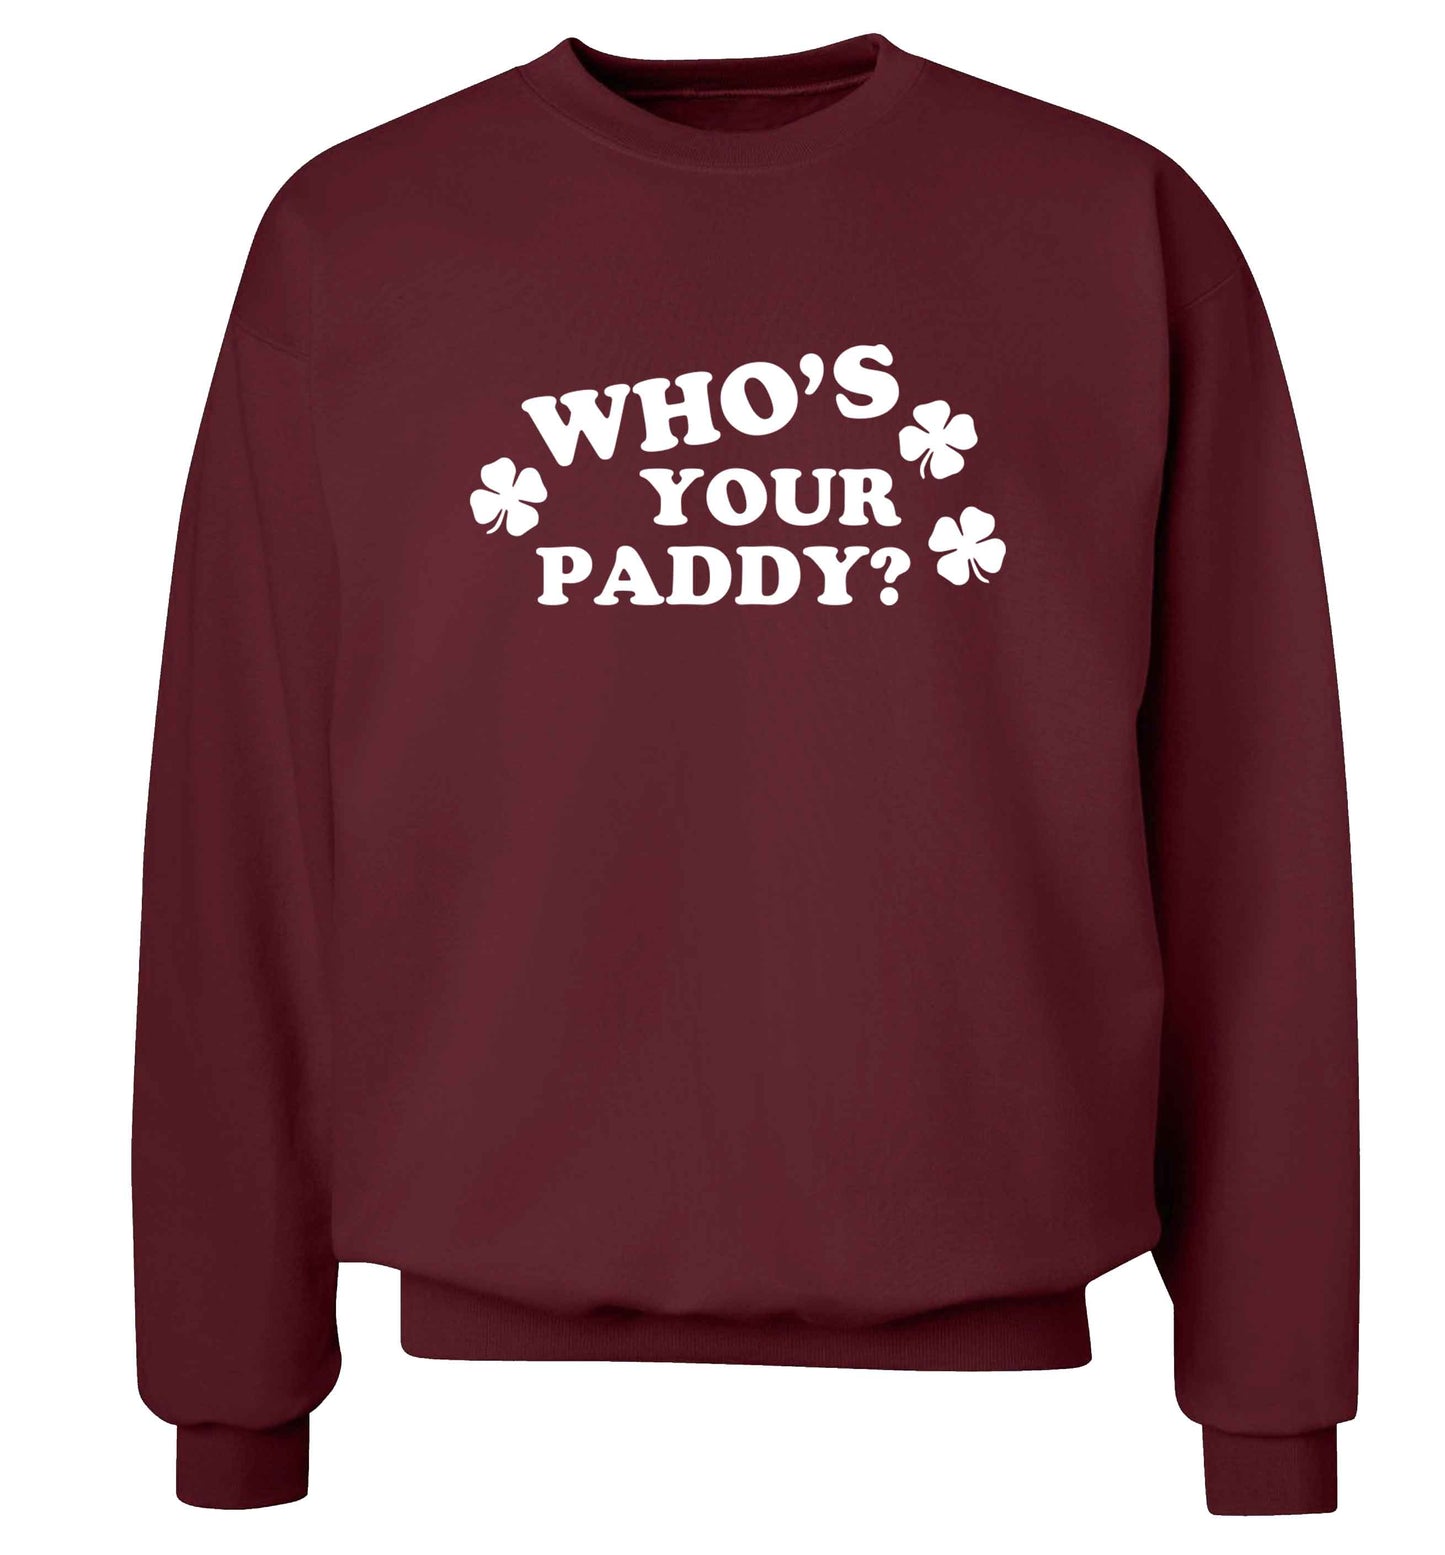 Who's your paddy? adult's unisex maroon sweater 2XL